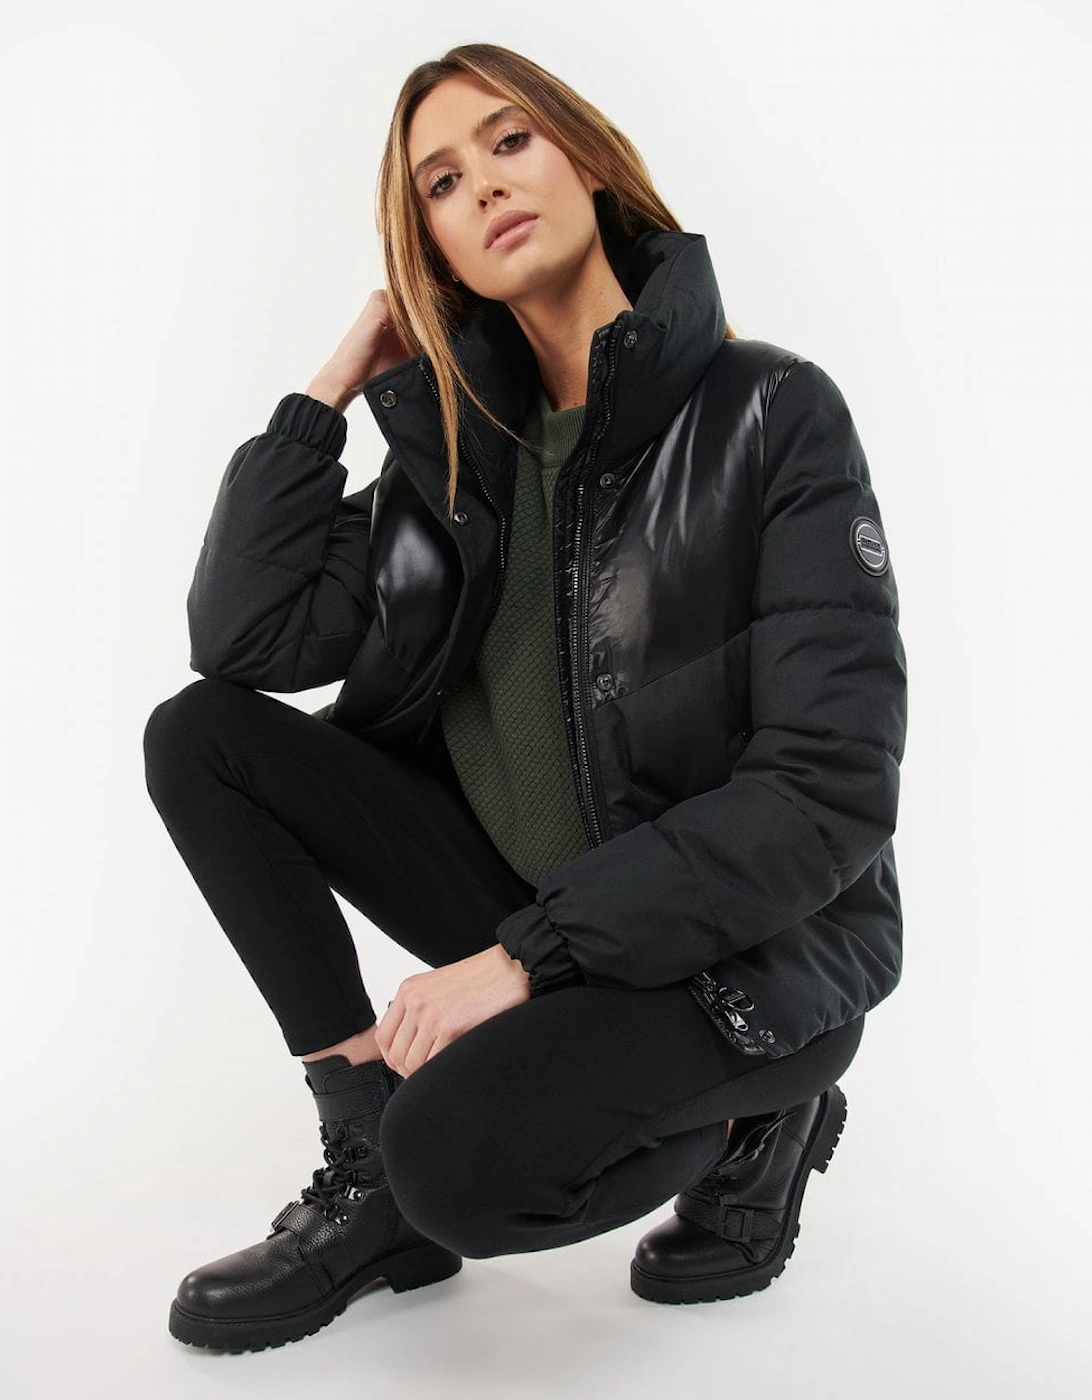 Titanium Womens Quilted Jacket